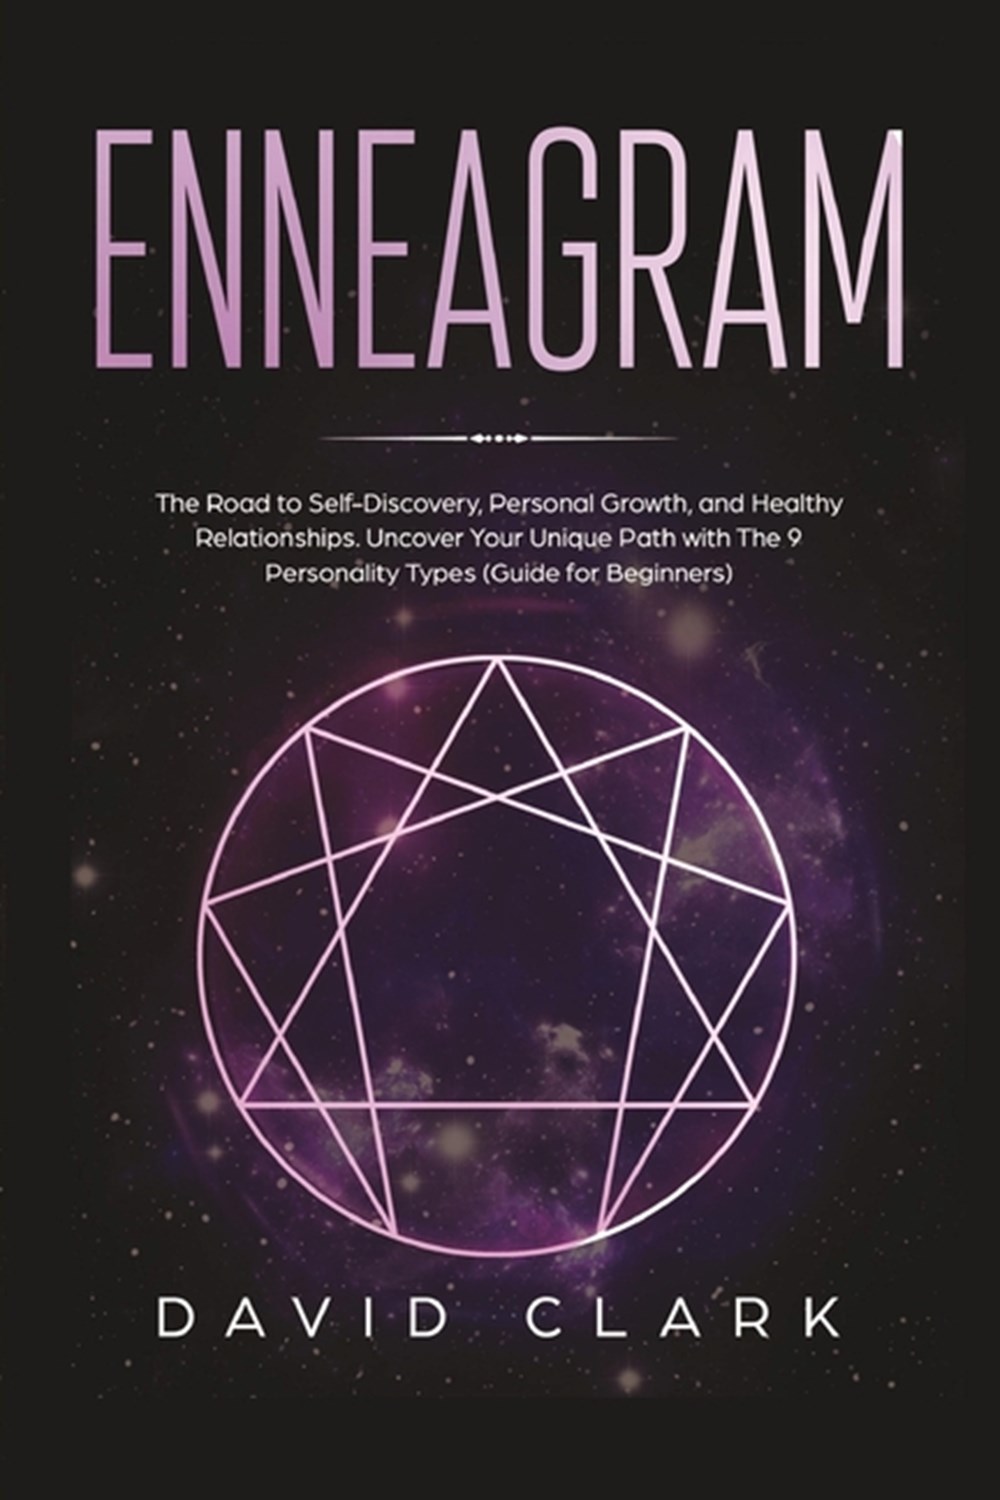 Enneagram The Road to Self-Discovery, Personal Growth, and Healthy Relationships. Uncover Your Uniqu